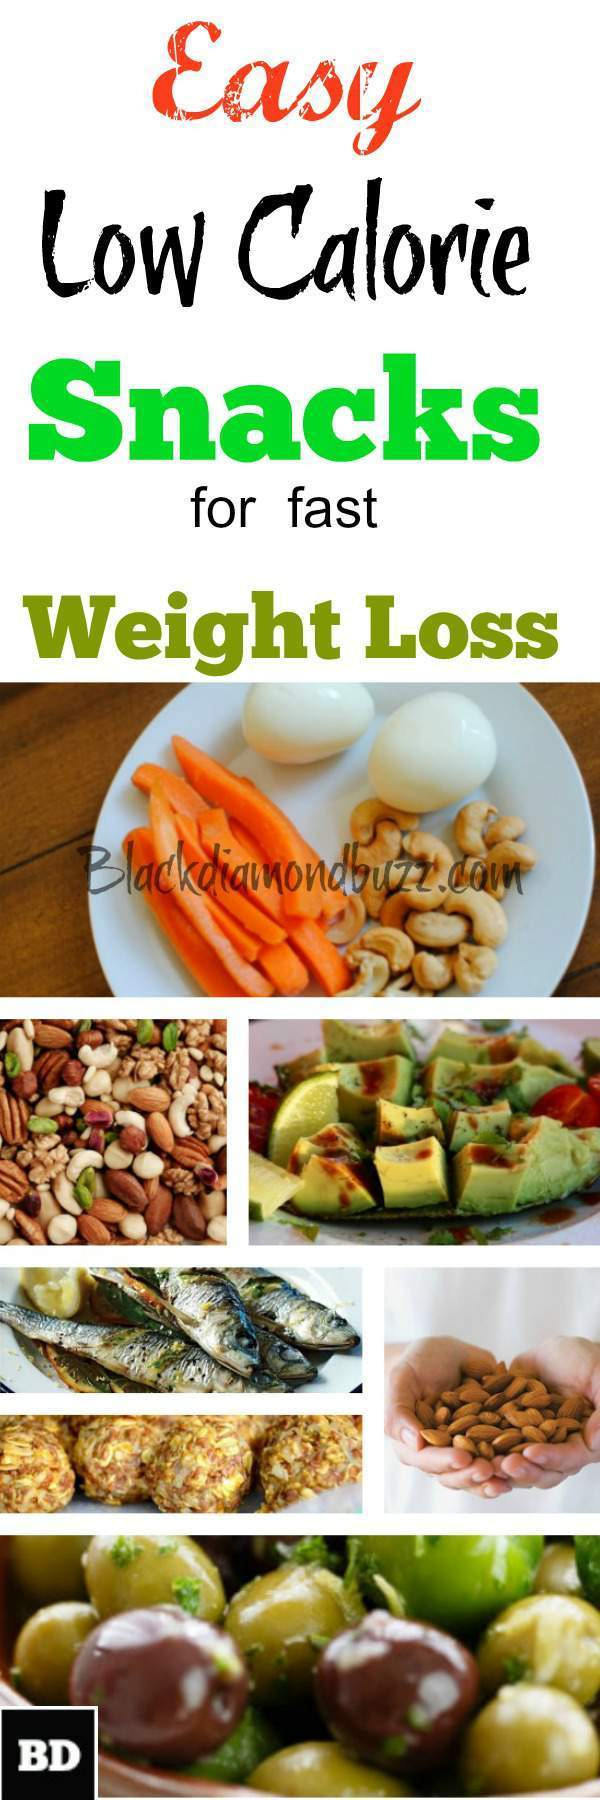 Low Calorie Healthy Snacks
 10 Best Easy Healthy Low Calorie Snacks for Weight Loss